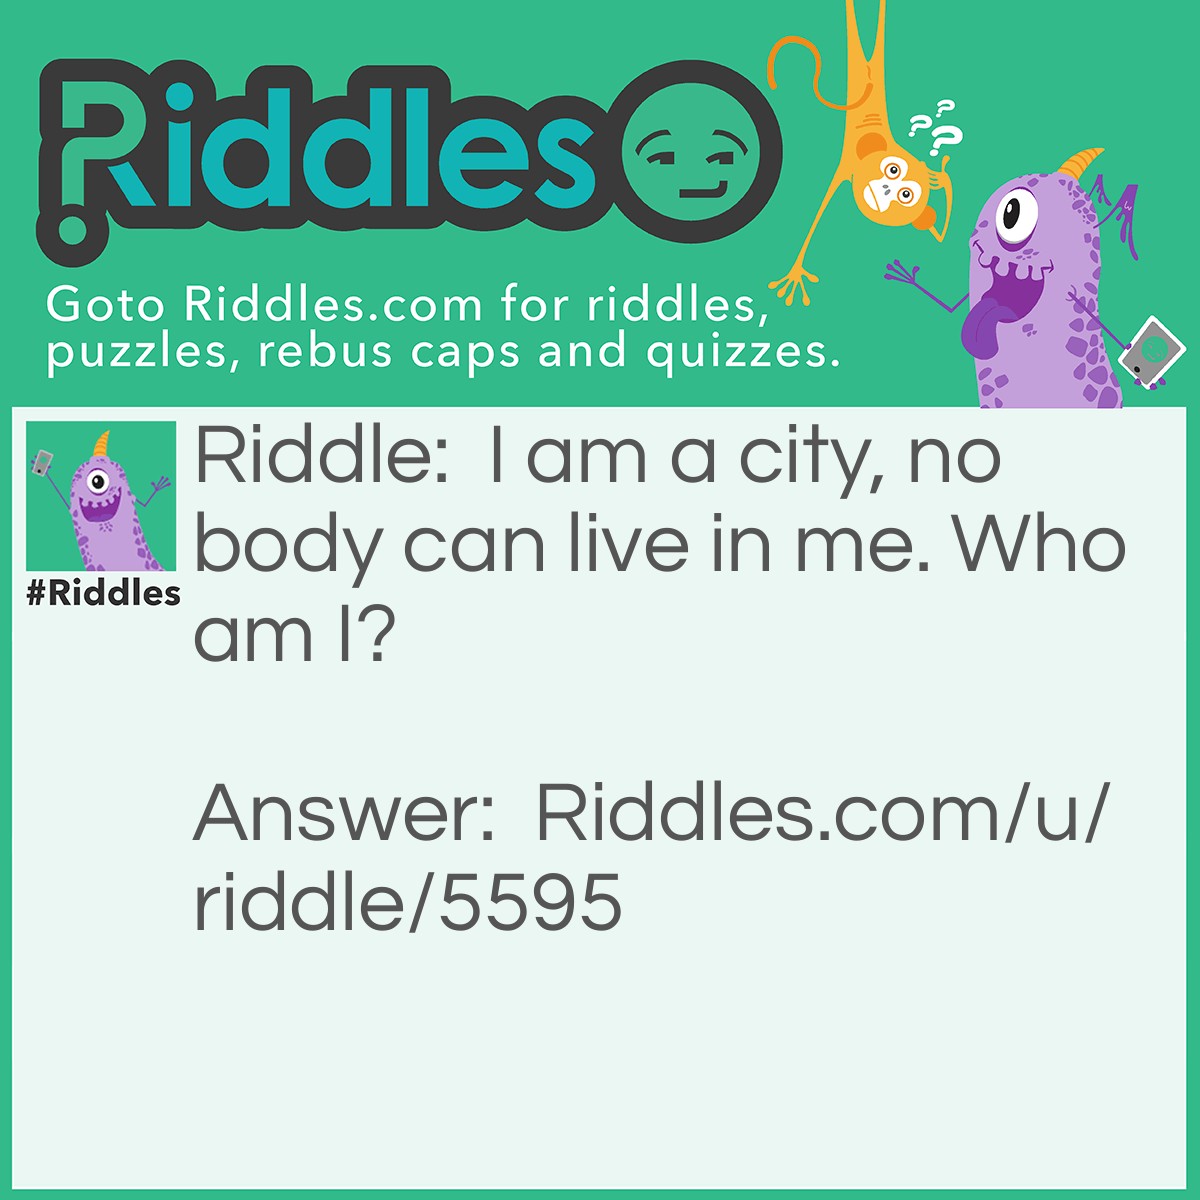 Riddle: I am a city, no body can live in me. Who am I? Answer: Electricity